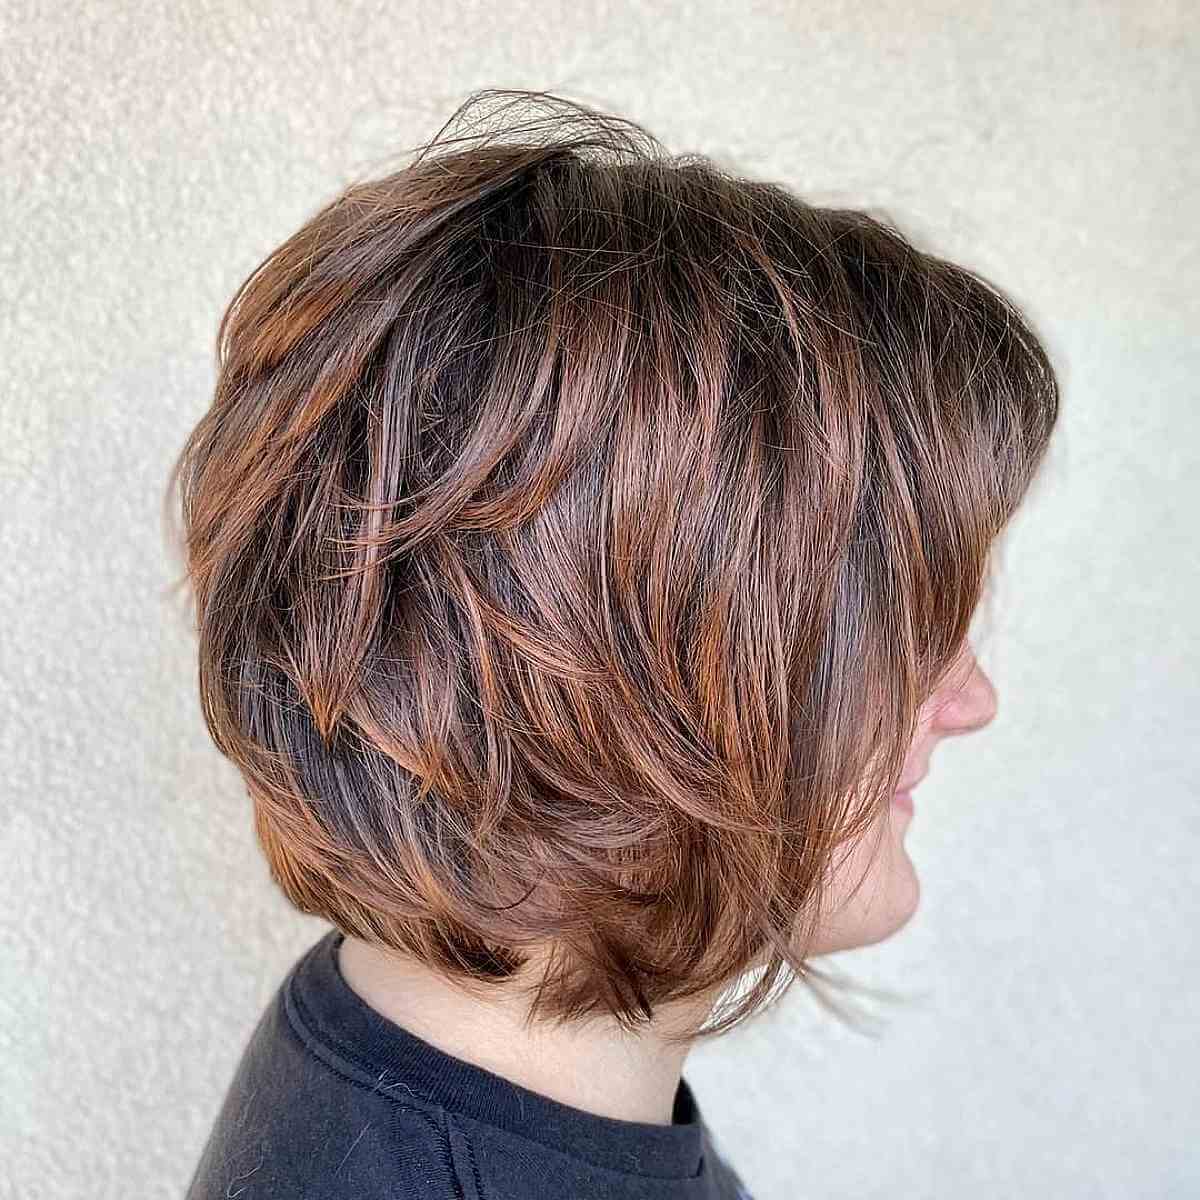 Short hair with several layers